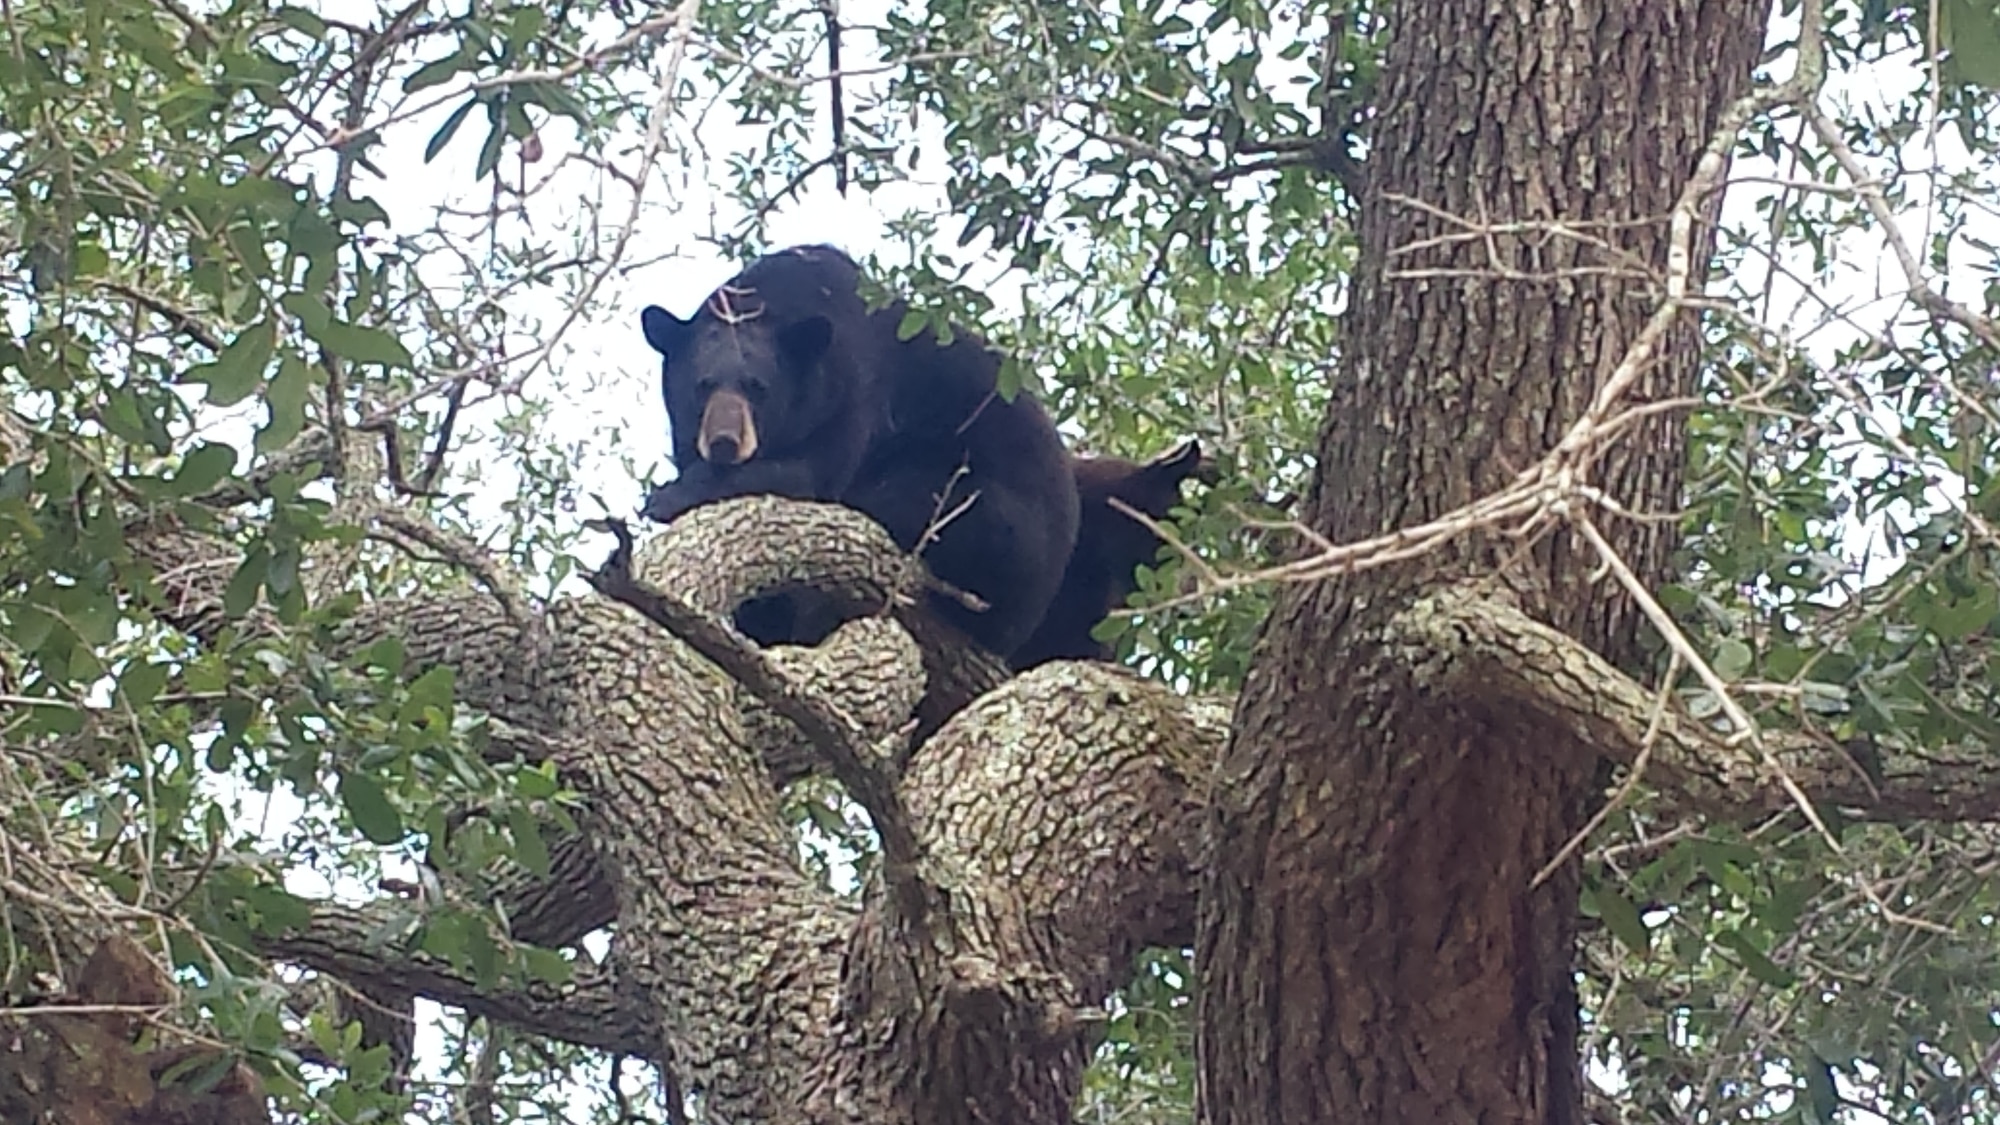 Florida black bears ress on the branch of a tree